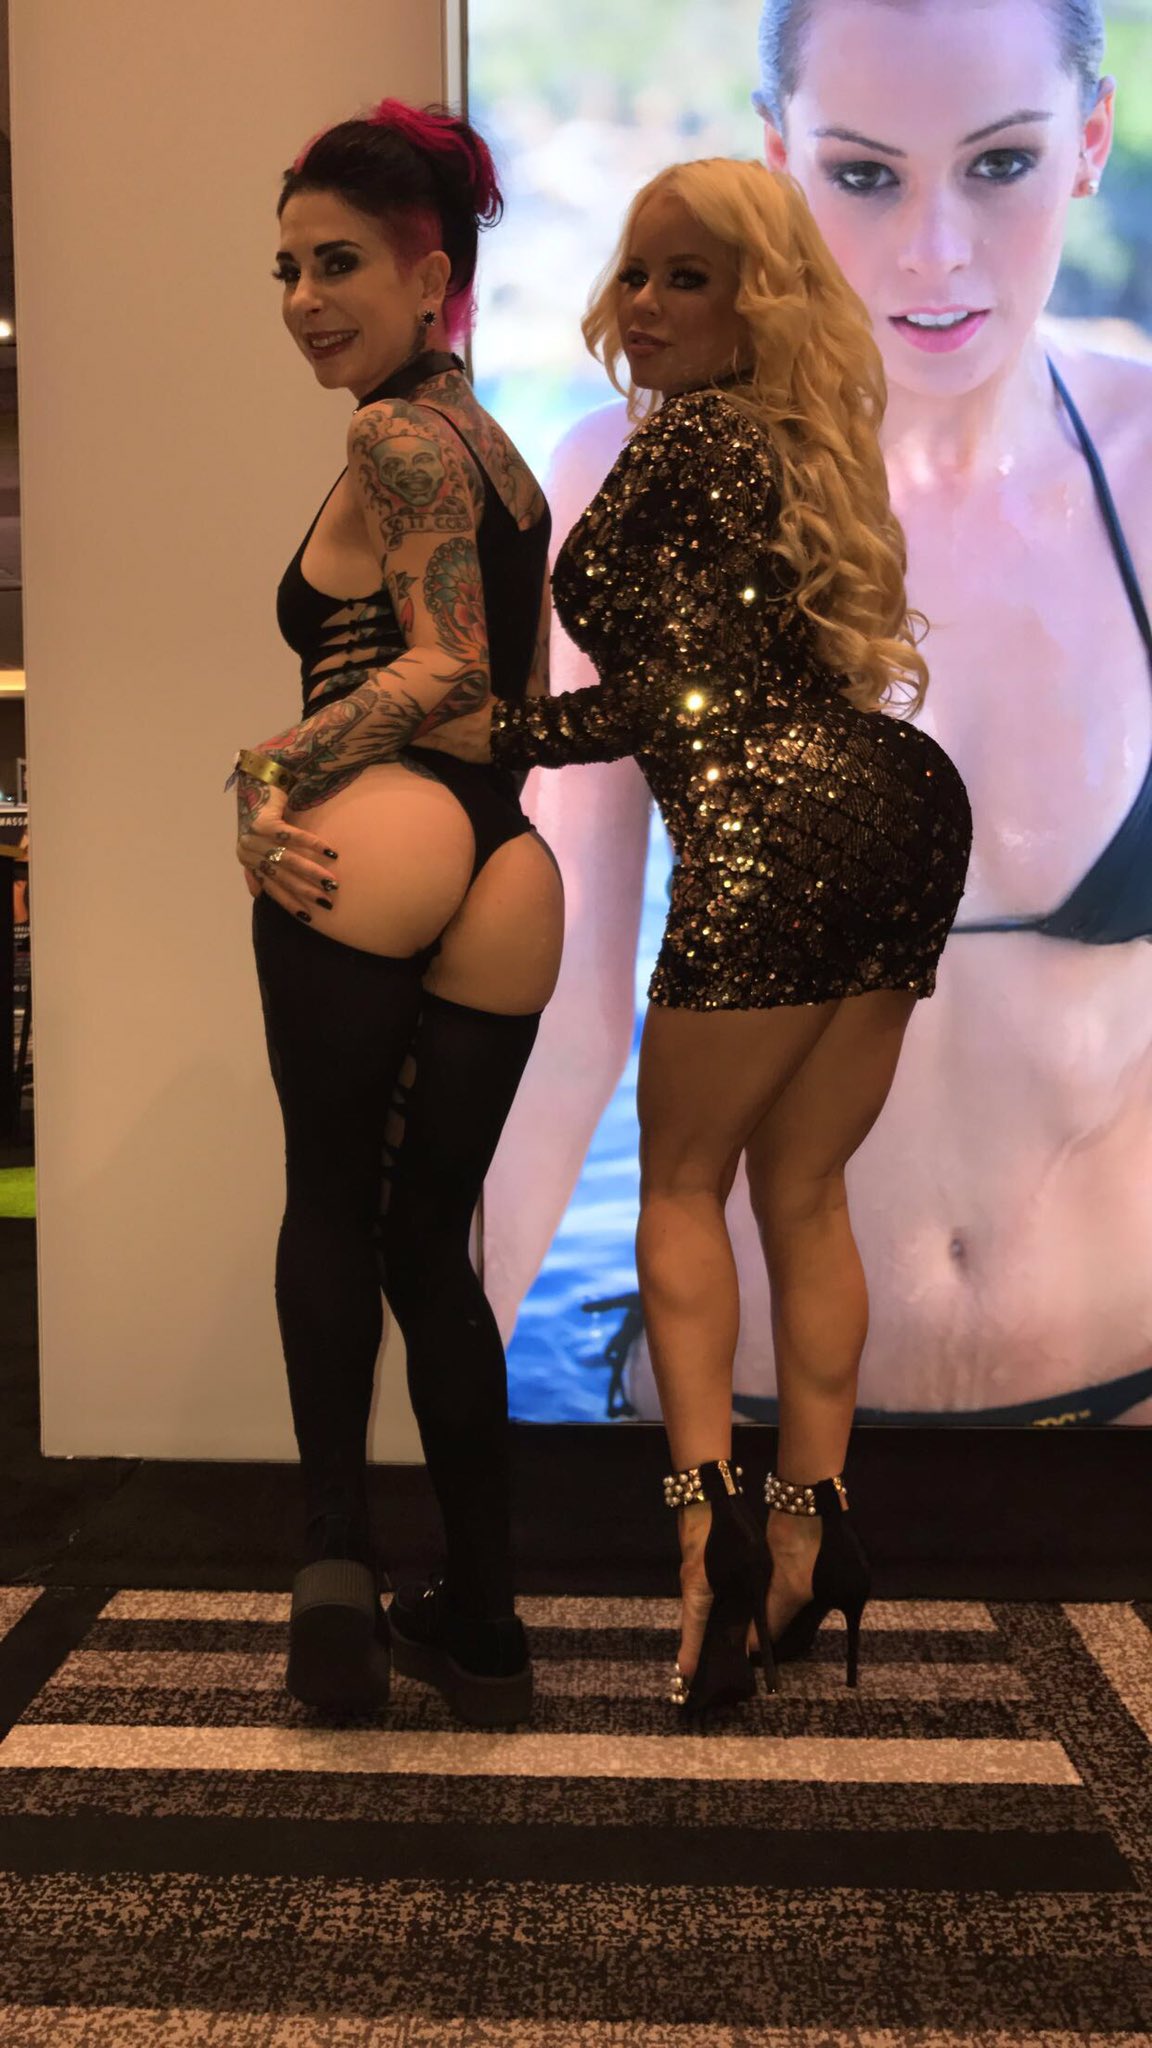 2 pic. Loved seeing you gorgeous your absolutely flawless and fun size like me 😻😻 @JoannaAngel https://t